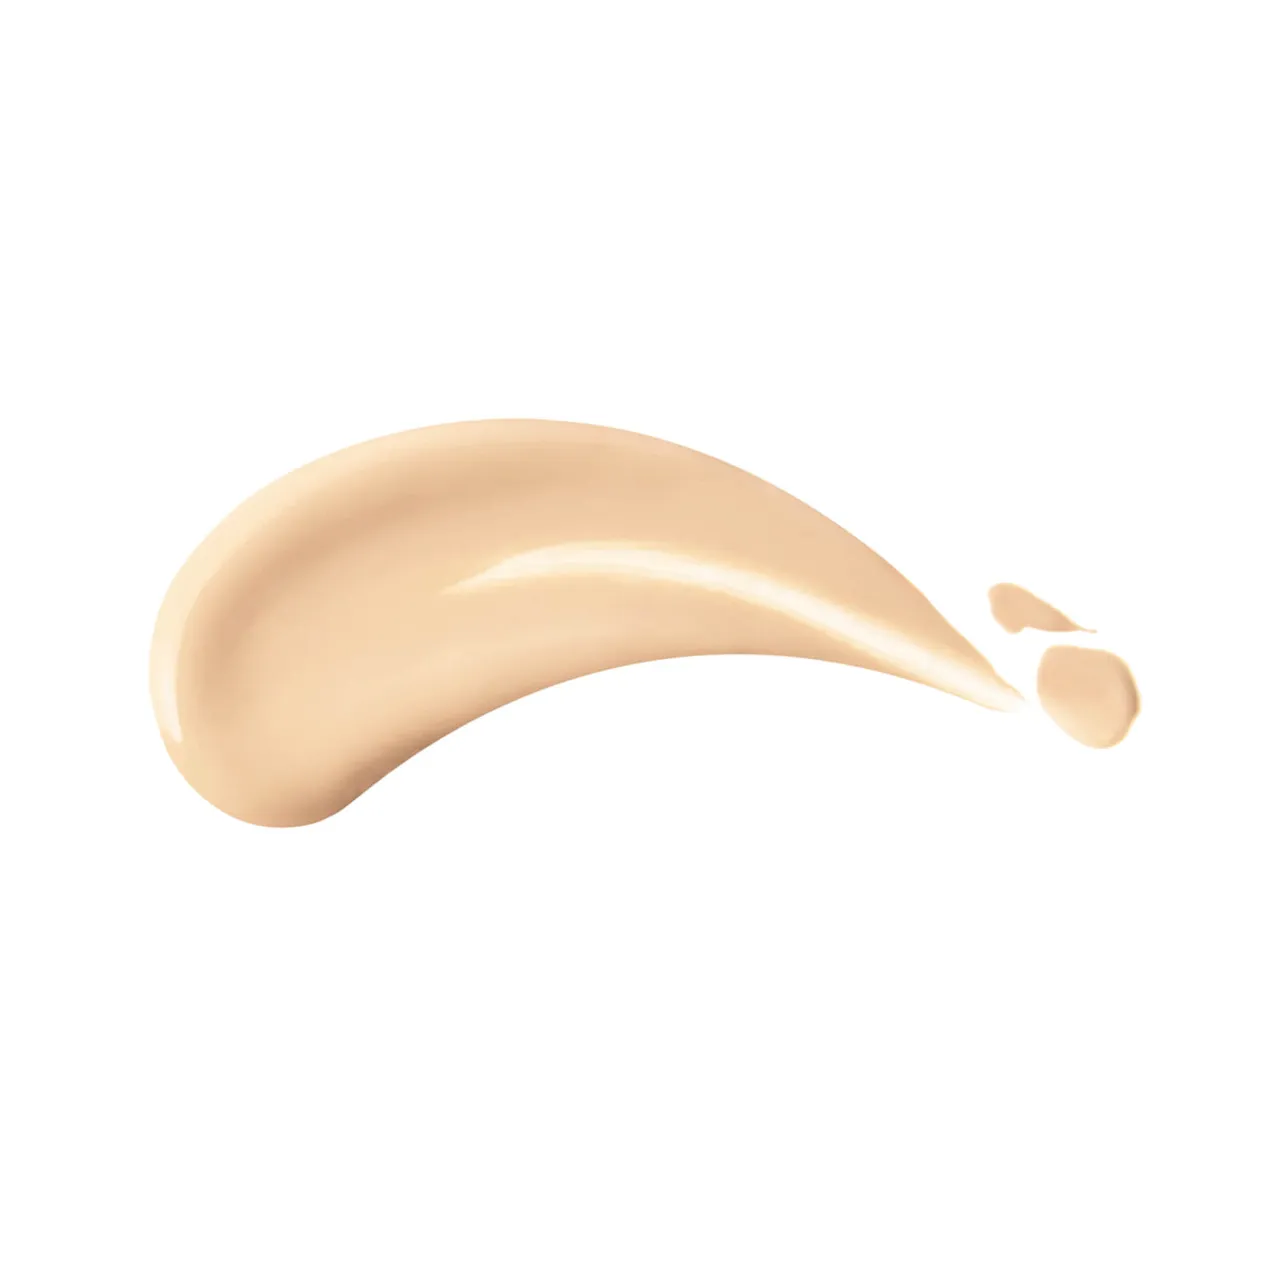 Shiseido Revitalessence Glow Foundation Exclusive 30ml (Various Shades) - 130 Opal